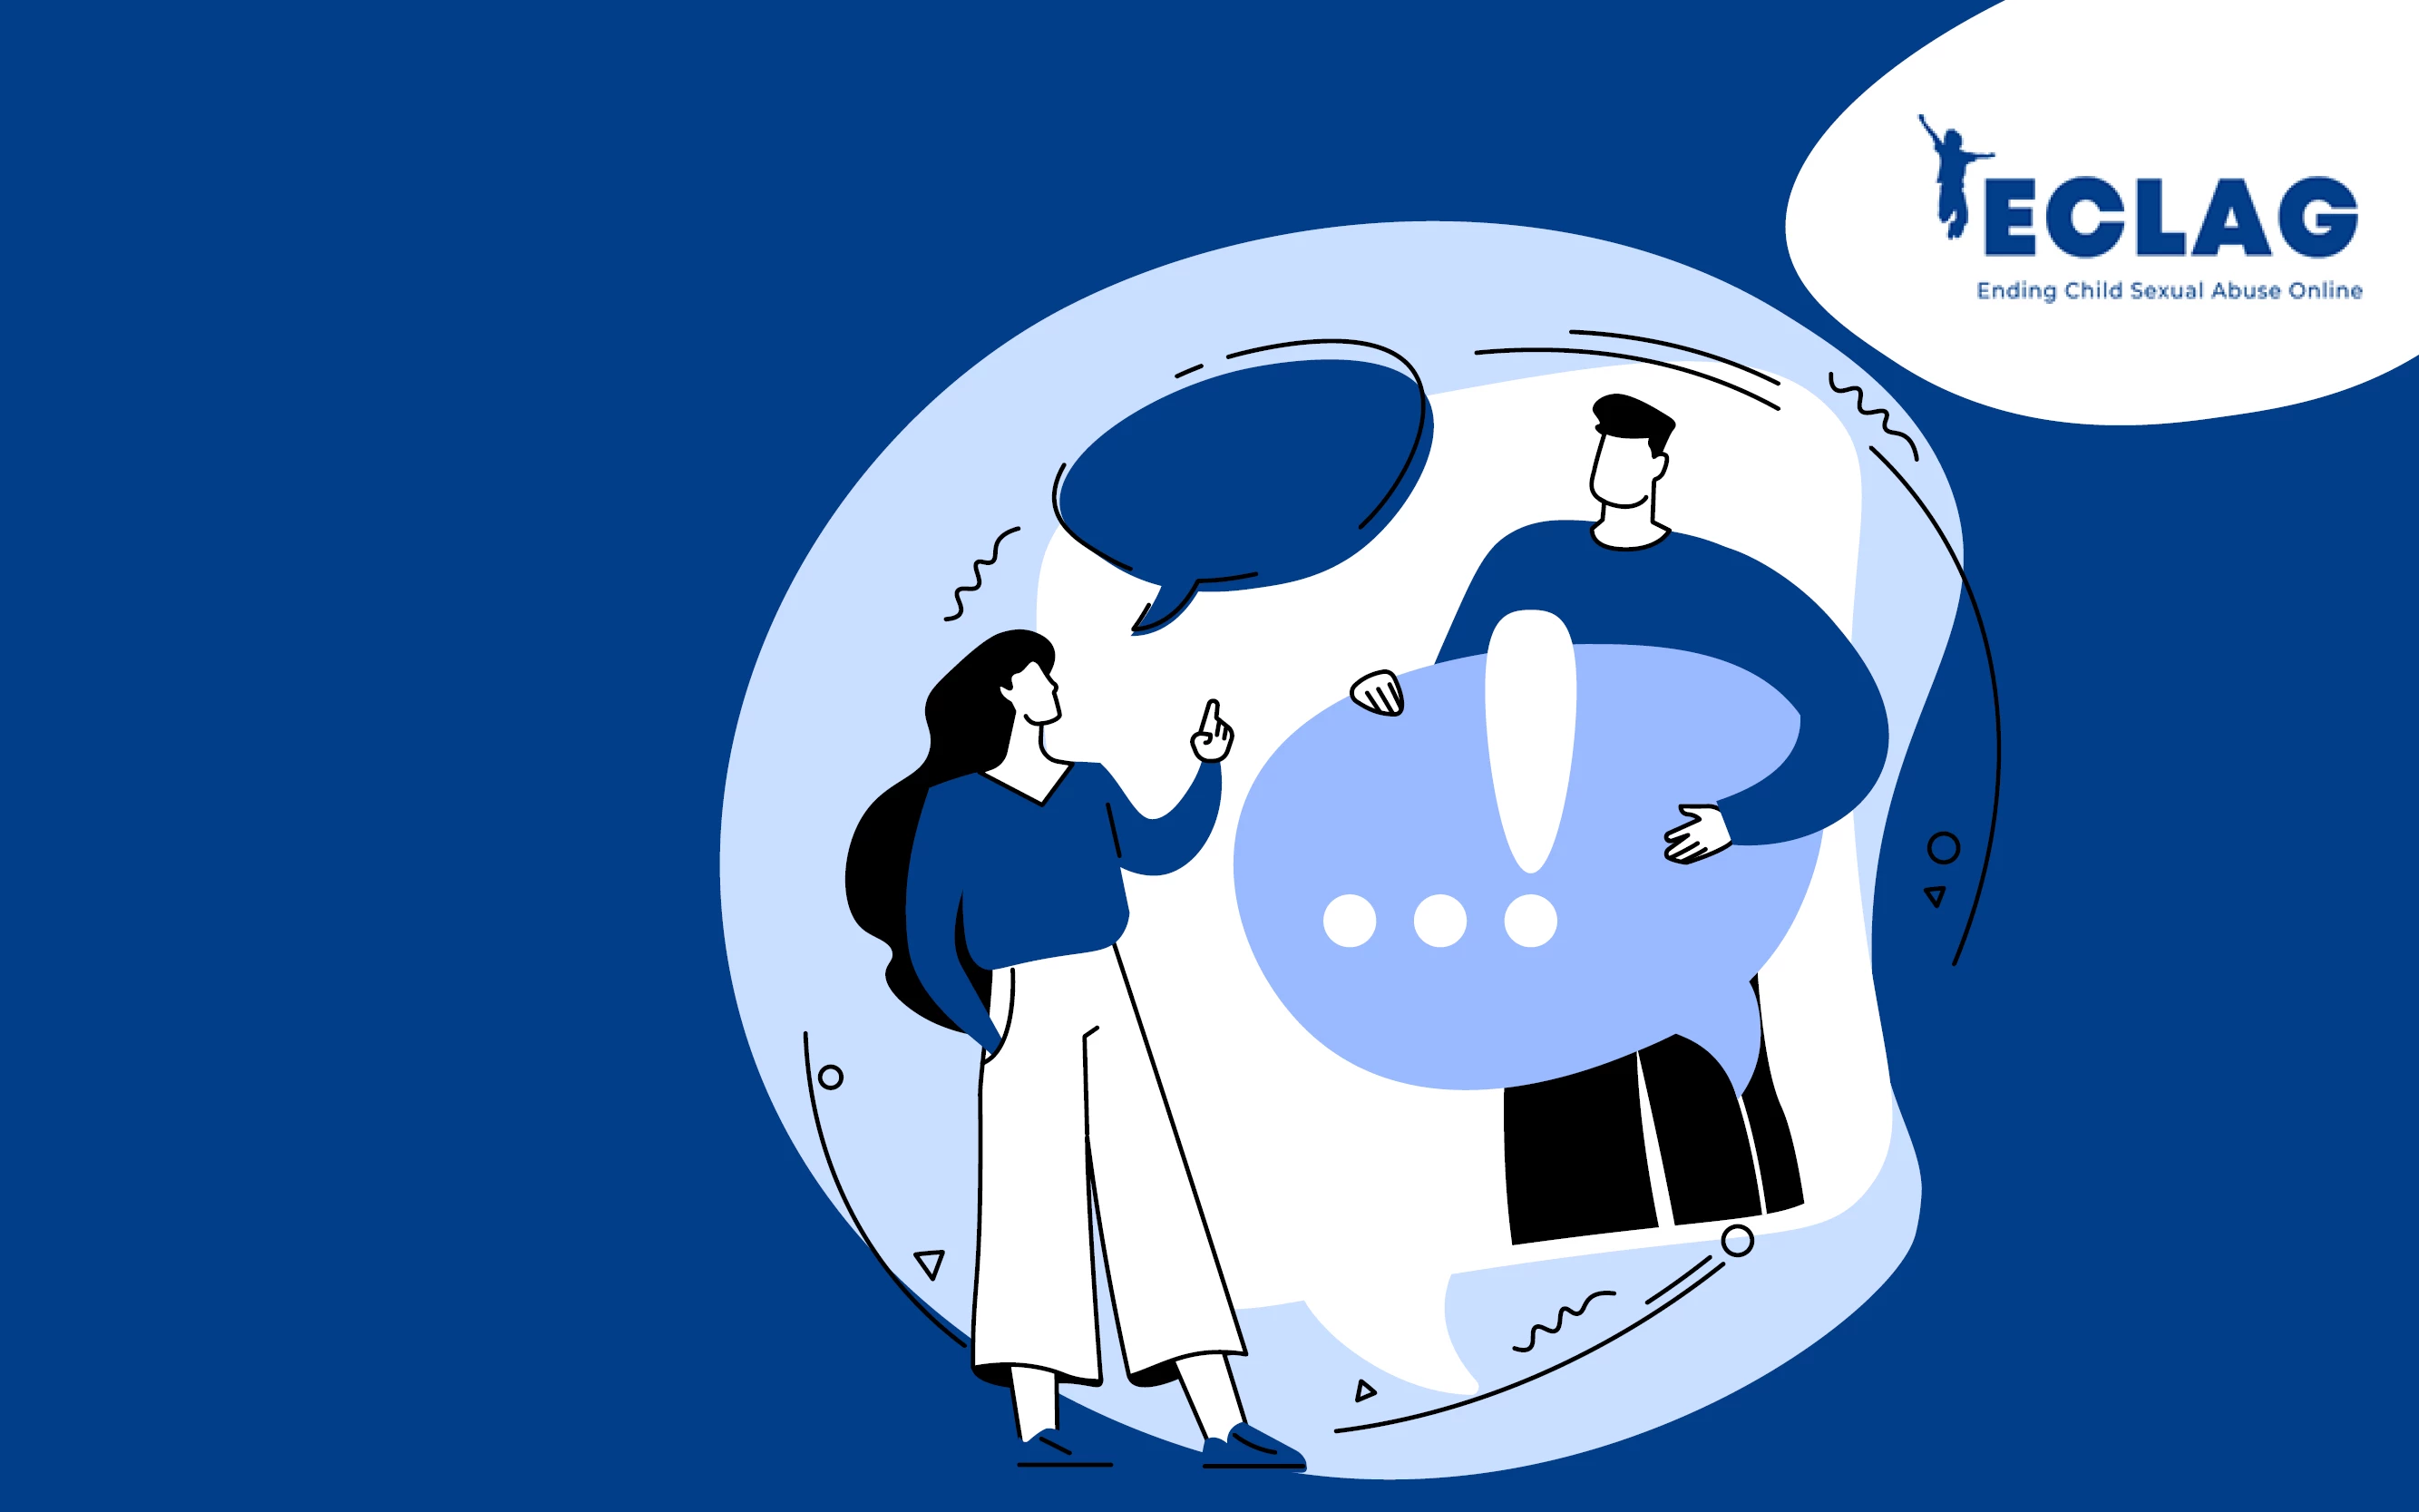 Illustration showing two people talking with the words ECLAG - Ending Child Sexual Abuse Online written next to them